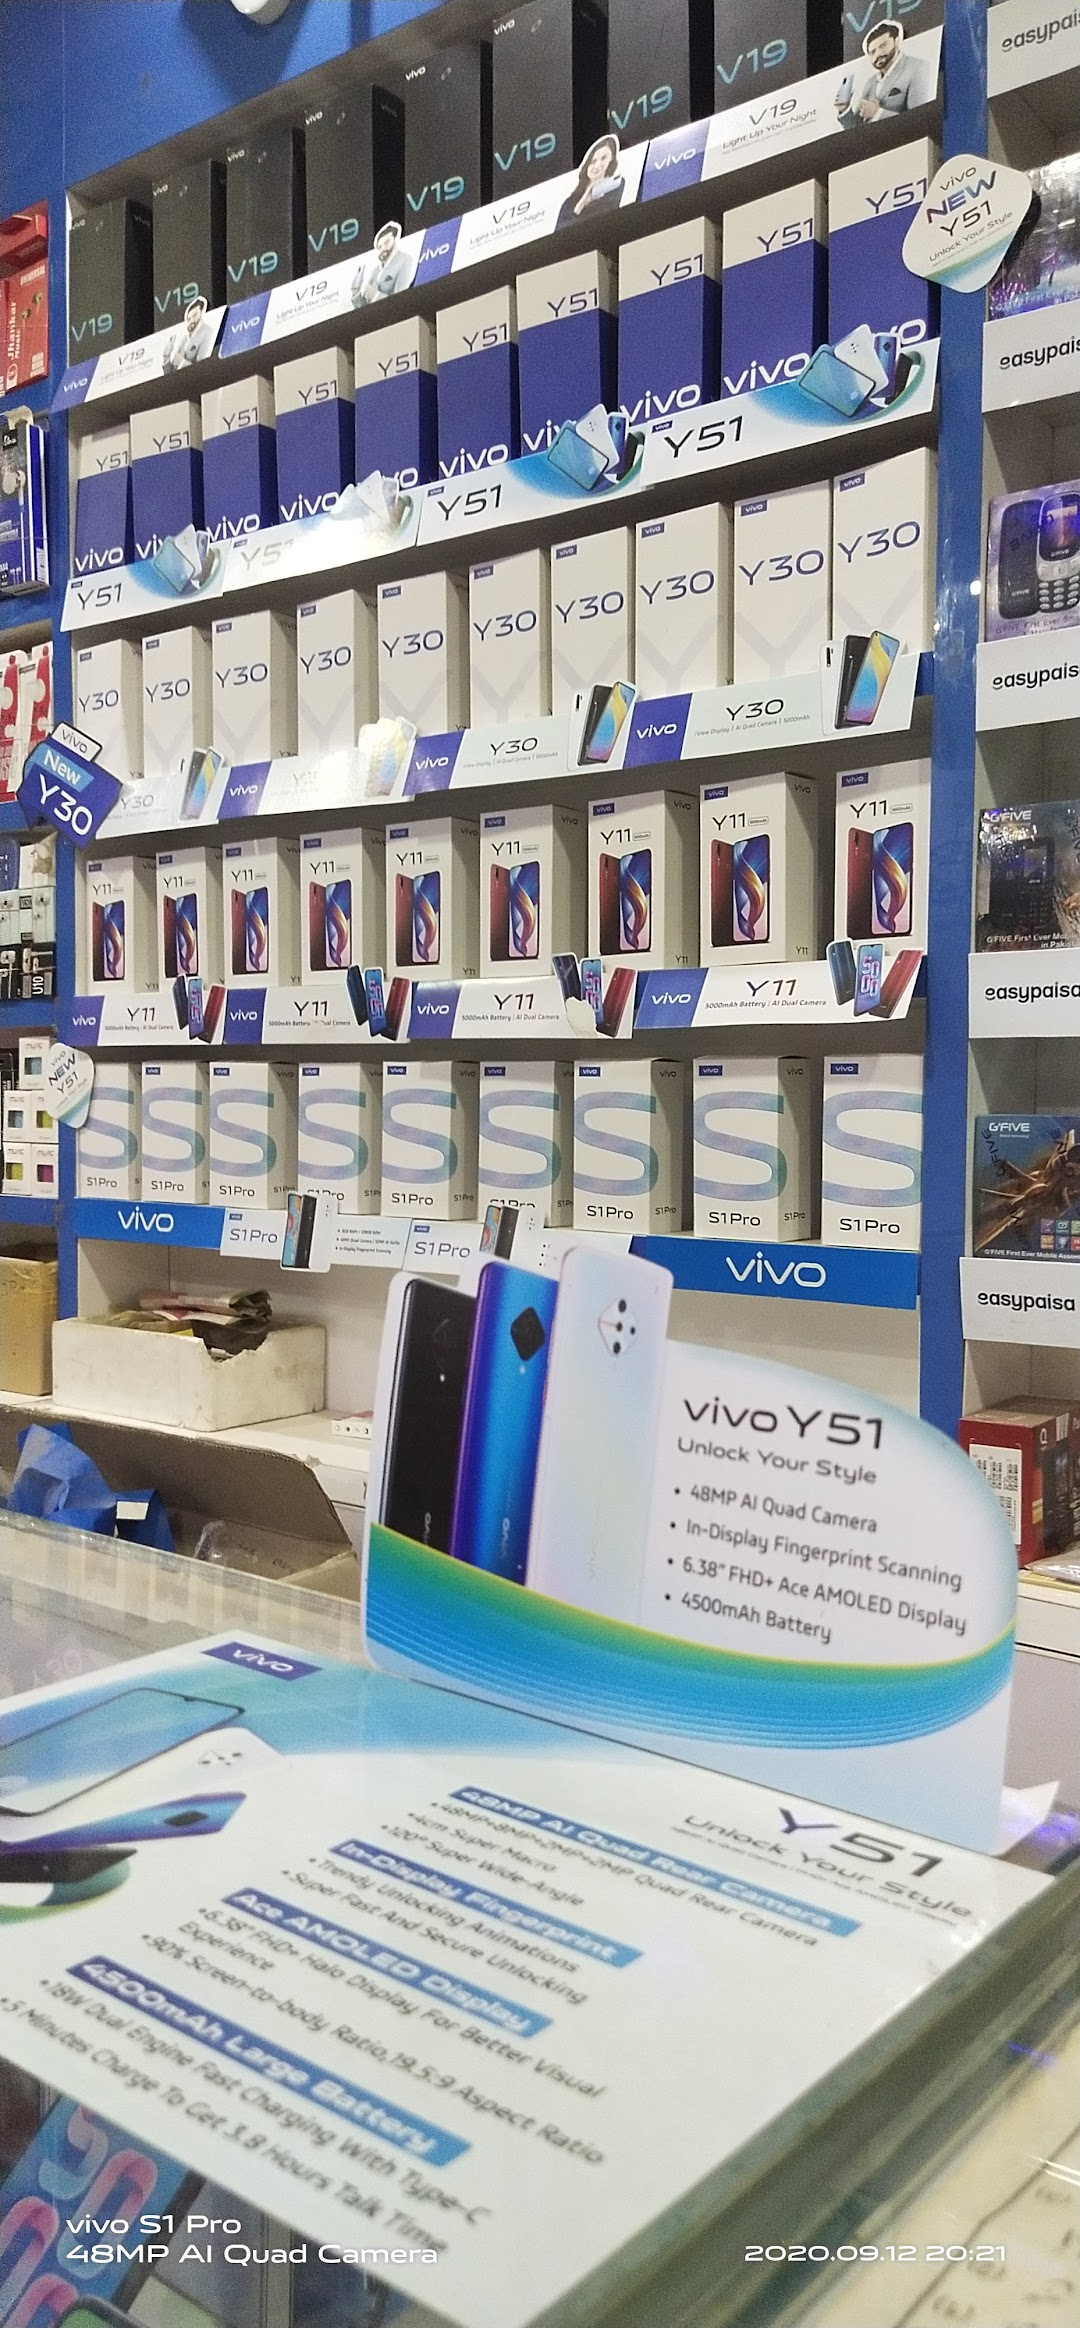 Electronics of sialkot and Vivo mobile center